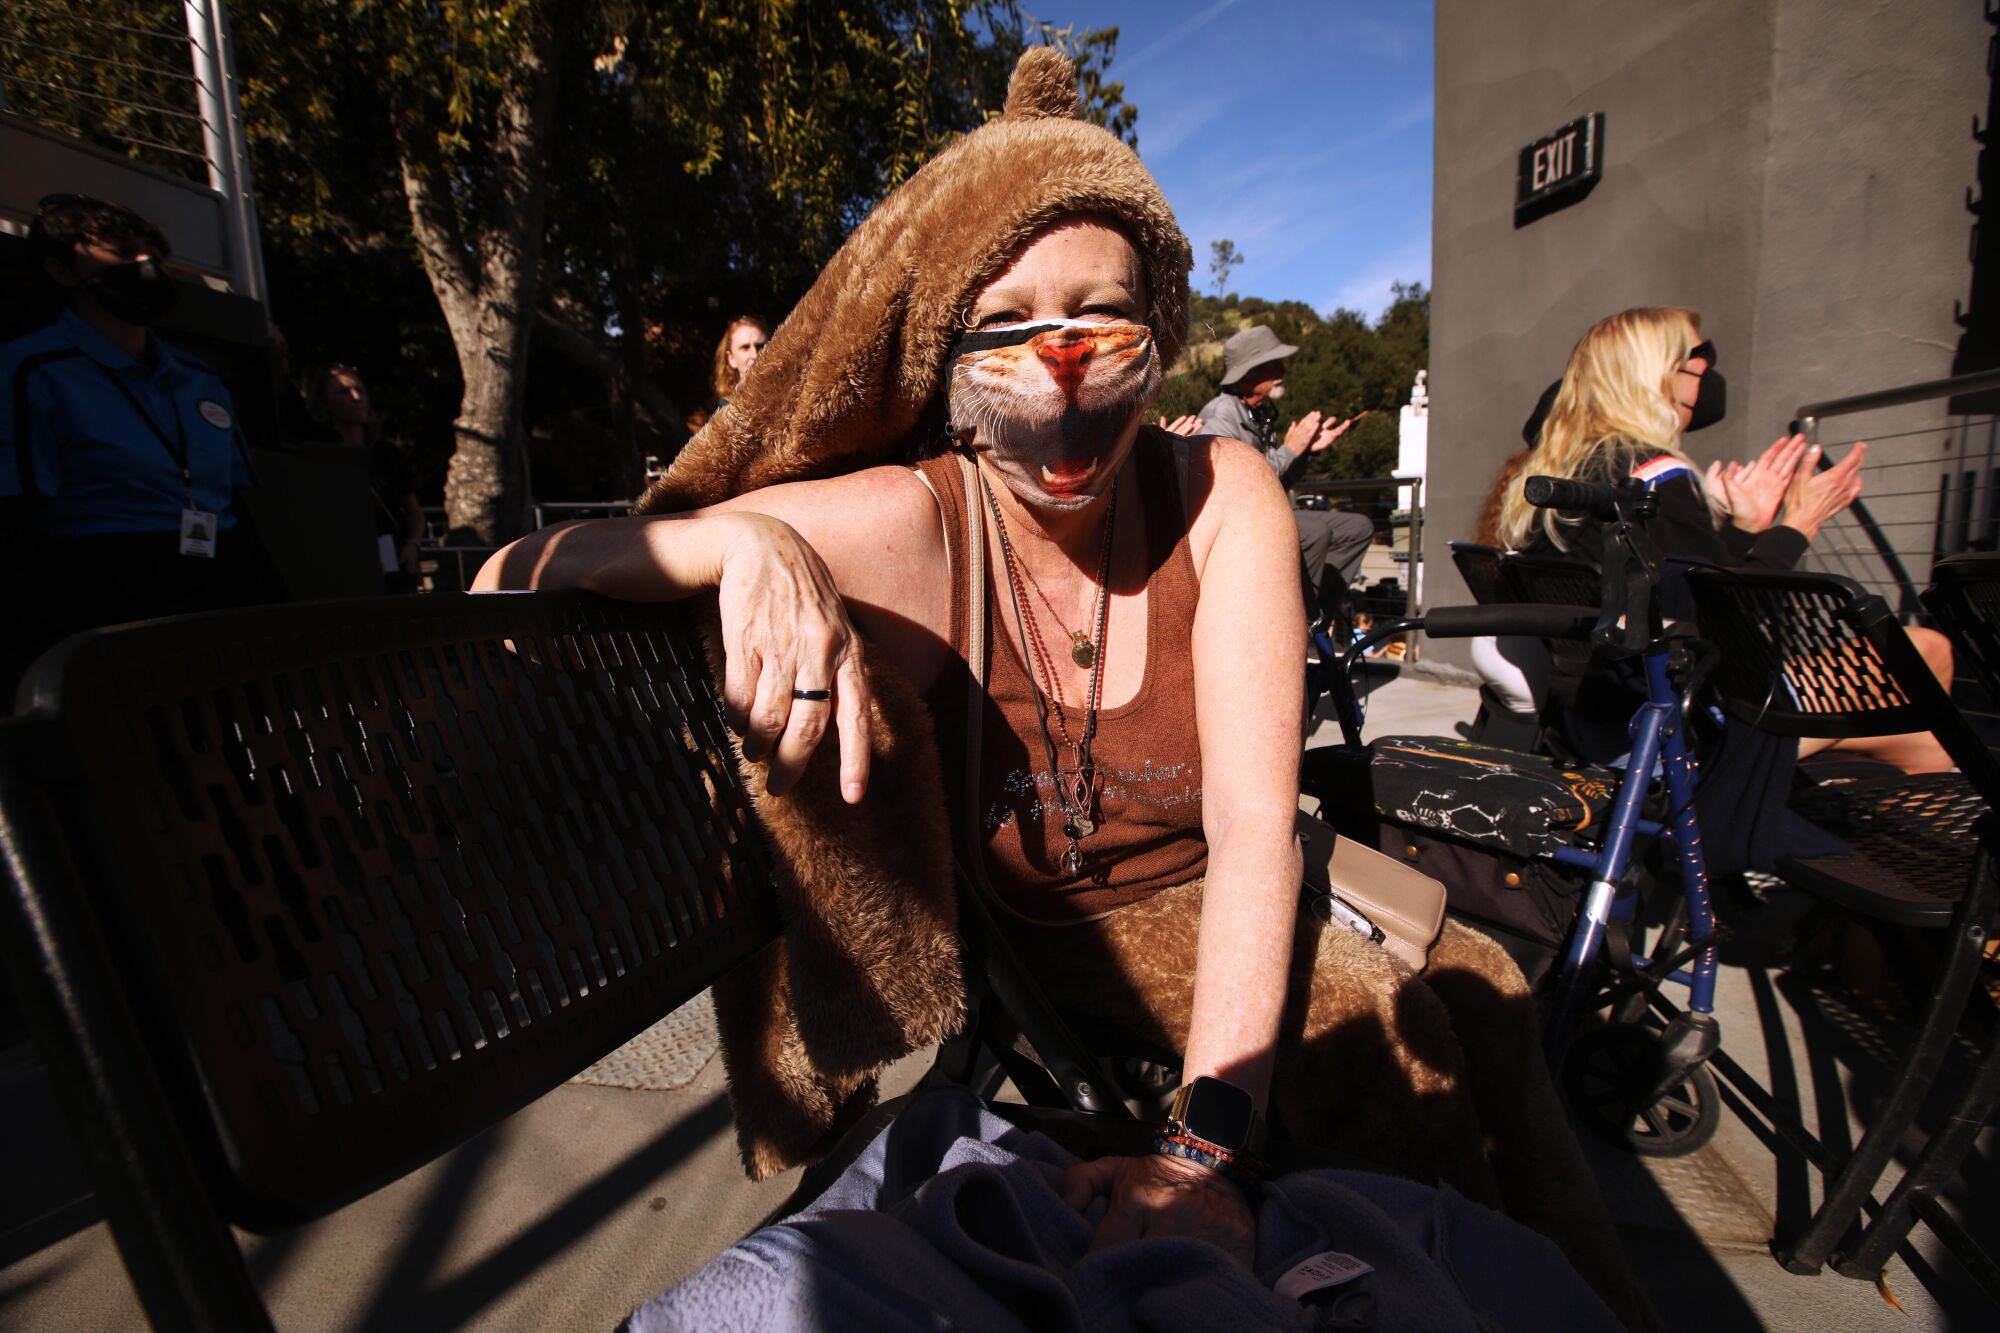 Jennifer Johnson wearing a cougar costume attends the "celebration of life" for P-22 at the Greek Theater.